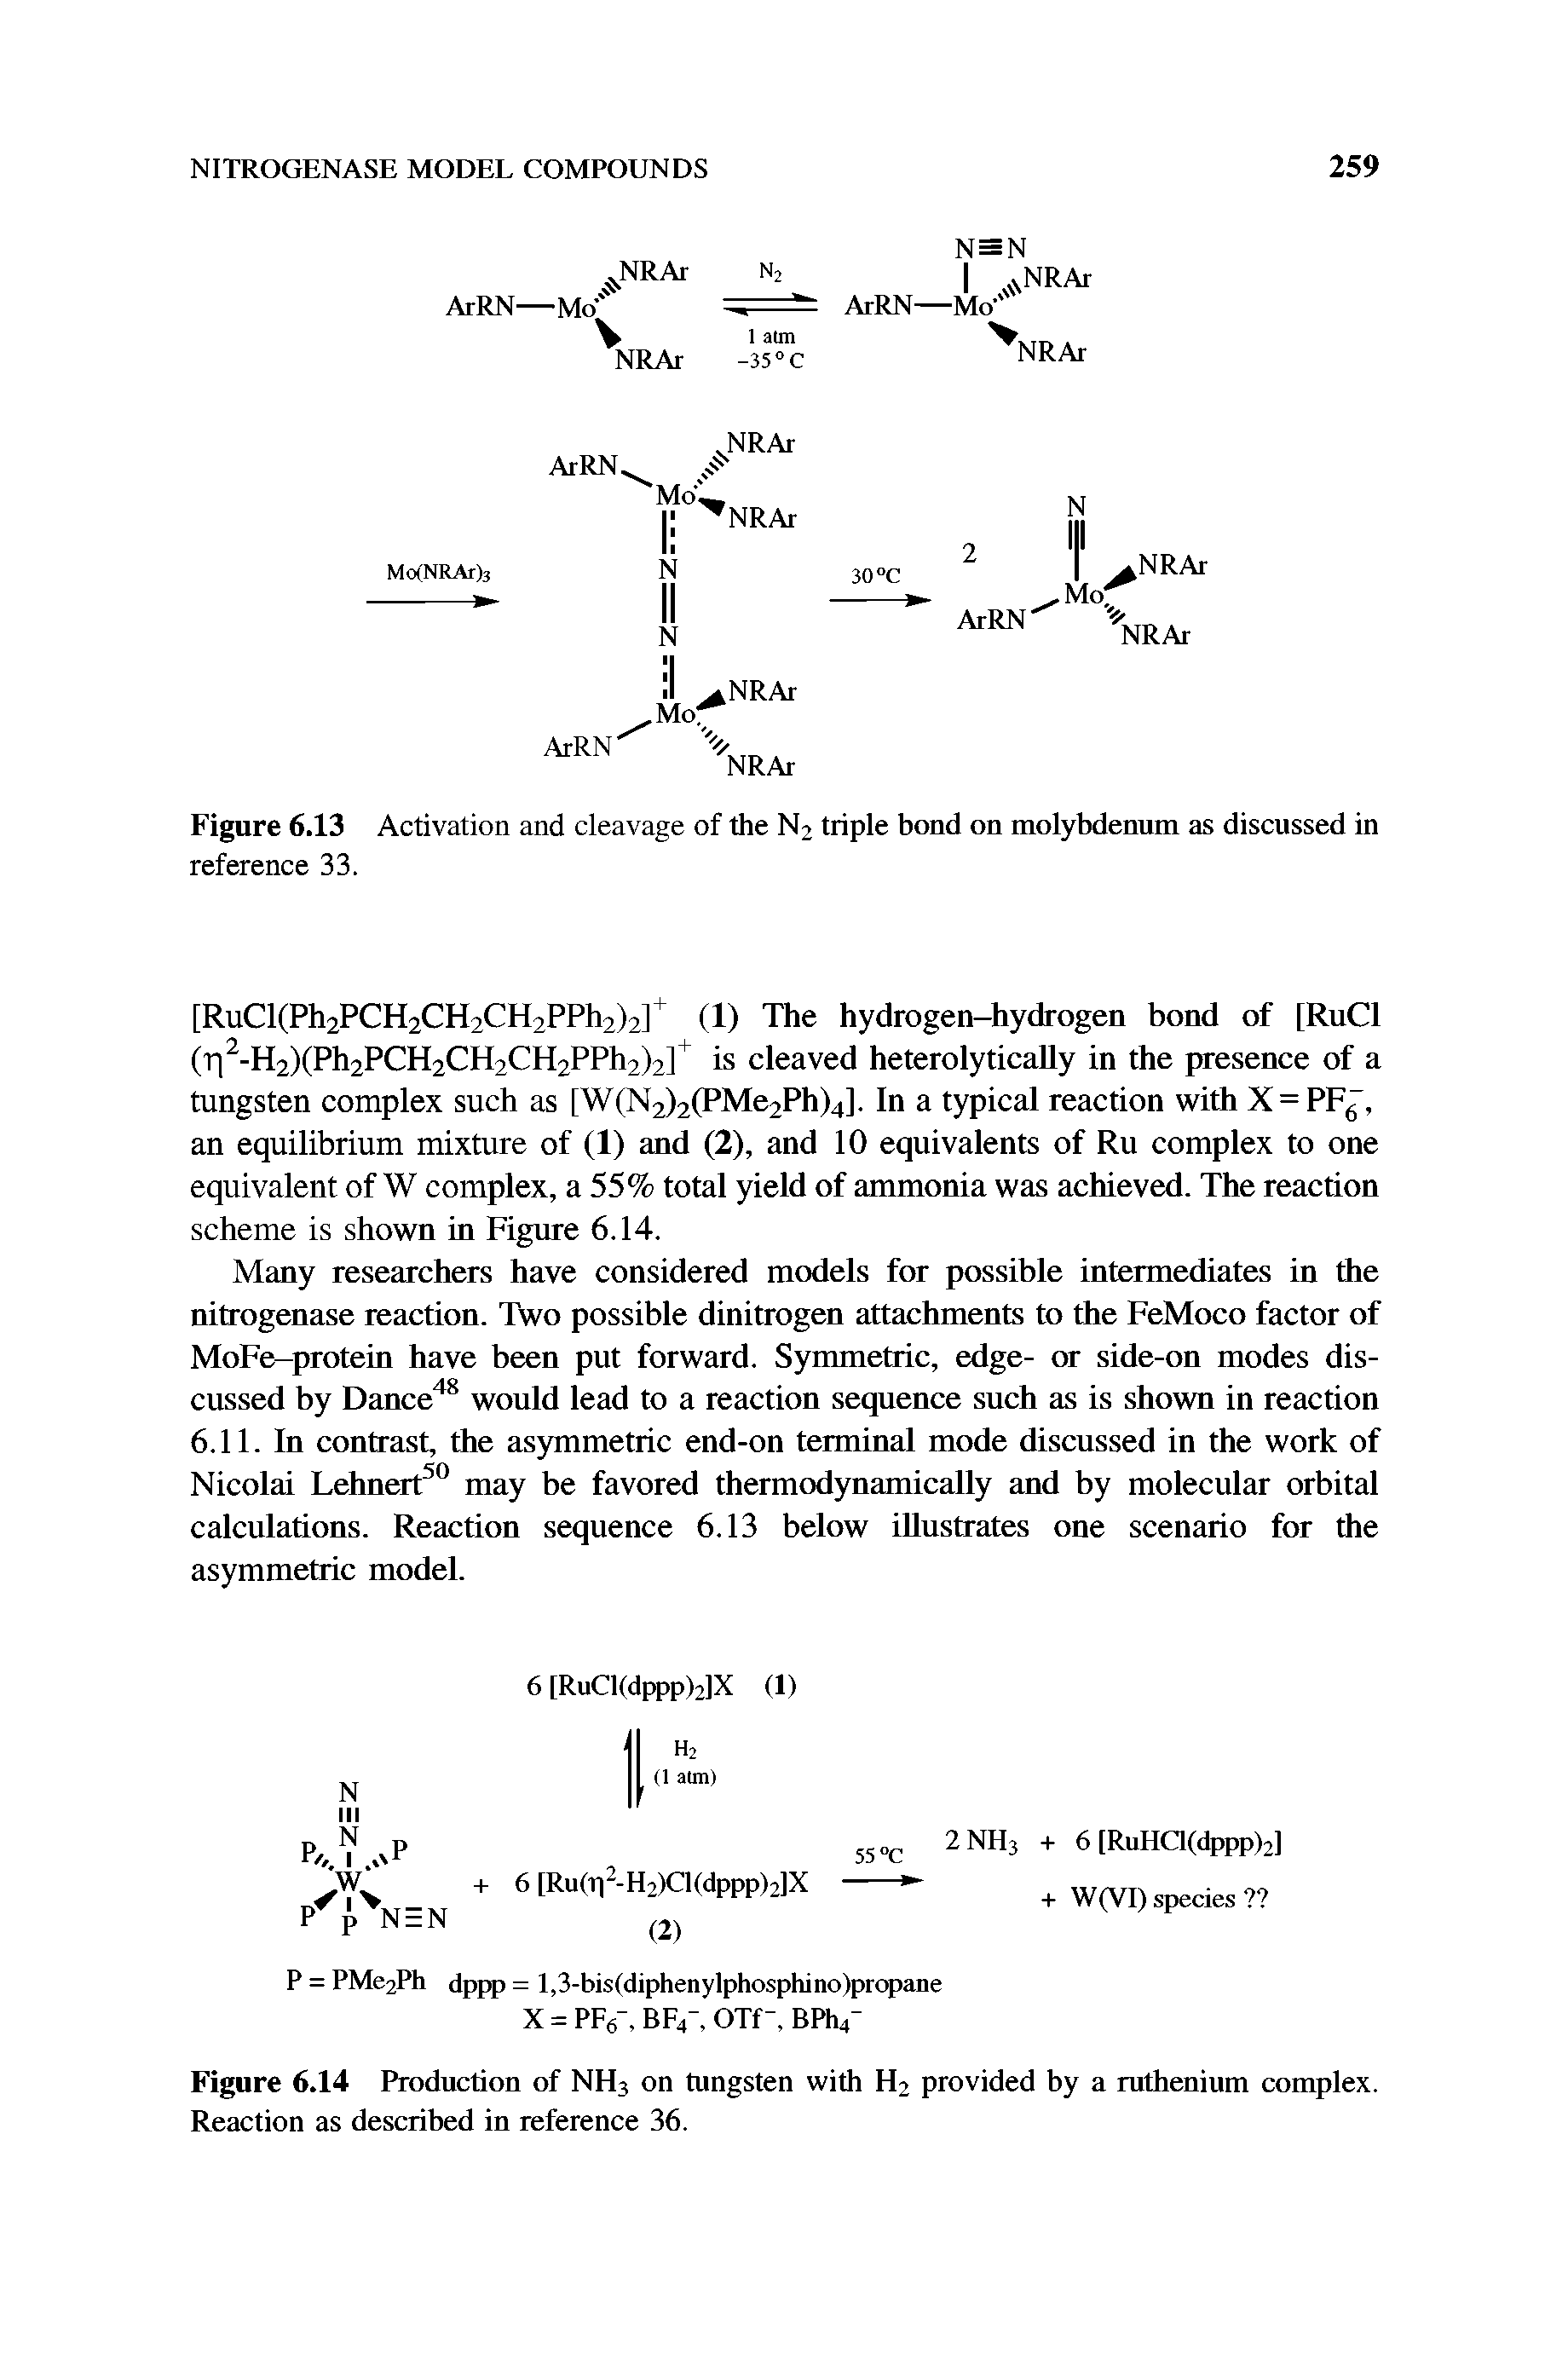 Figure 6.14 Production of NH3 on tungsten with H2 provided by a ruthenium complex. Reaction as described in reference 36.